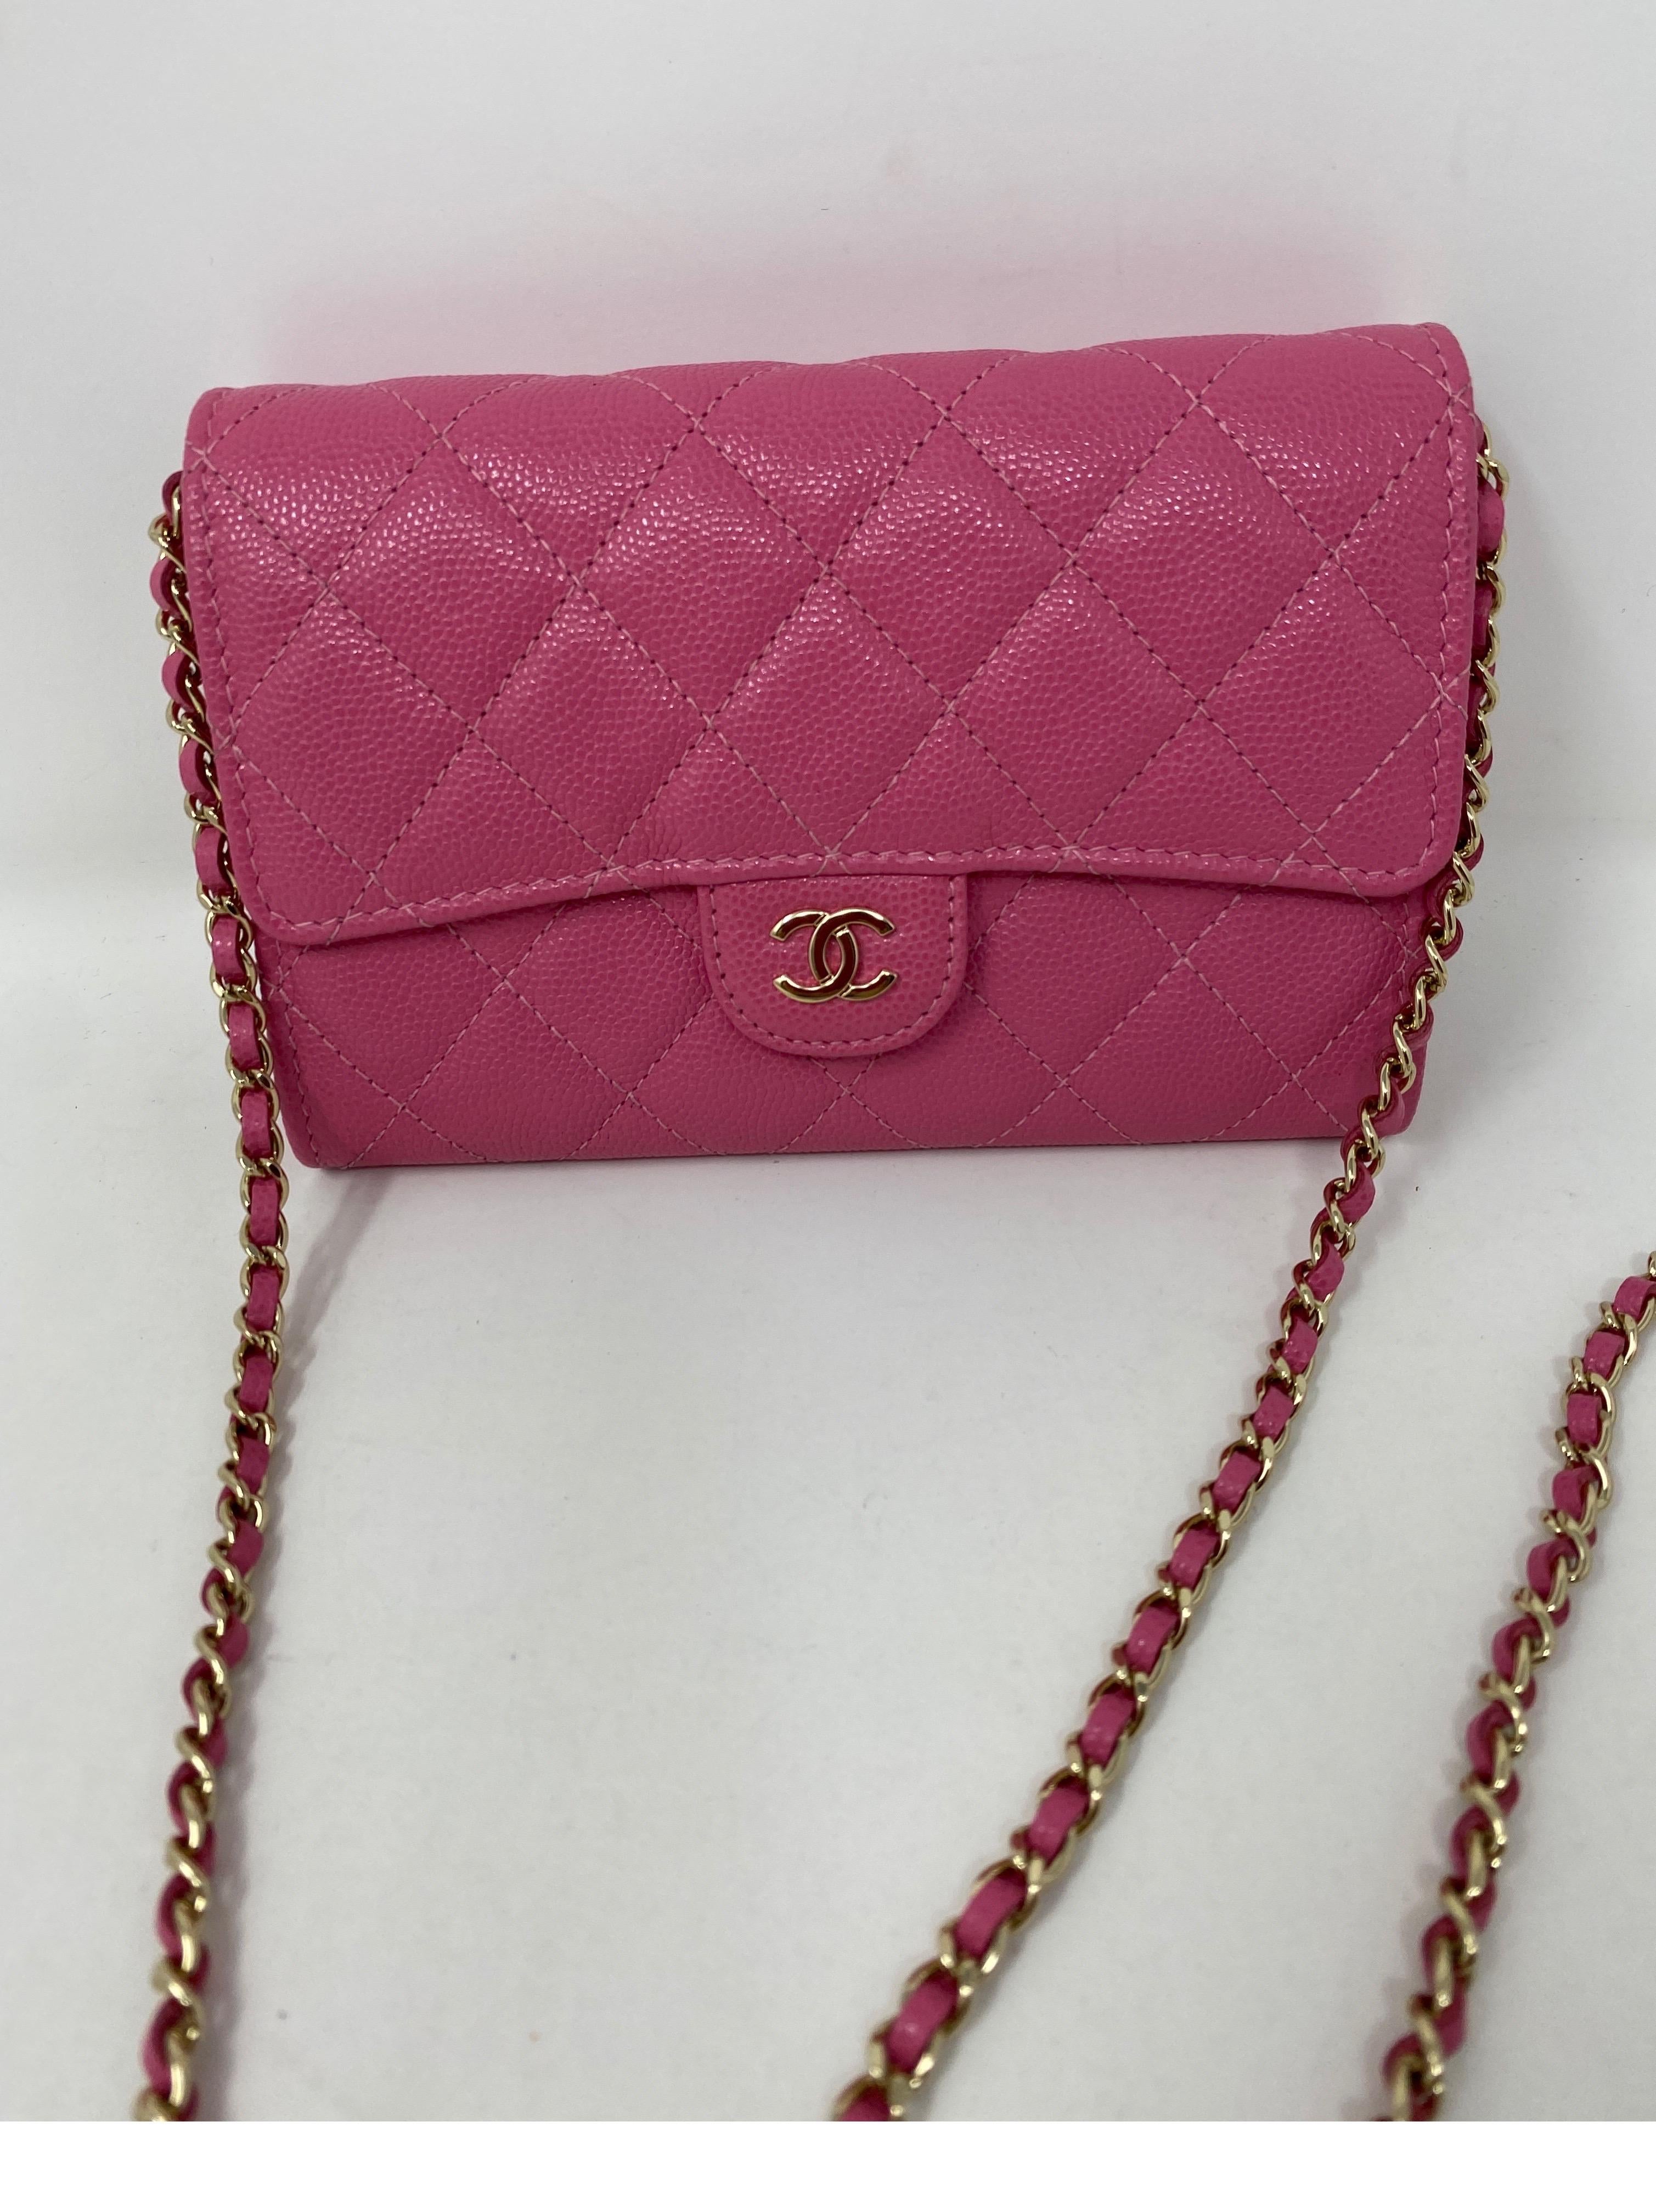 Chanel Mini Hot Pink Wallet On A Chain Bag. Pink caviar leather with gold hardware. Mint like new condition. Hard to find mini size. Collector's piece. Includes authenticity card, dust cover and box. Guaranteed authentic. 